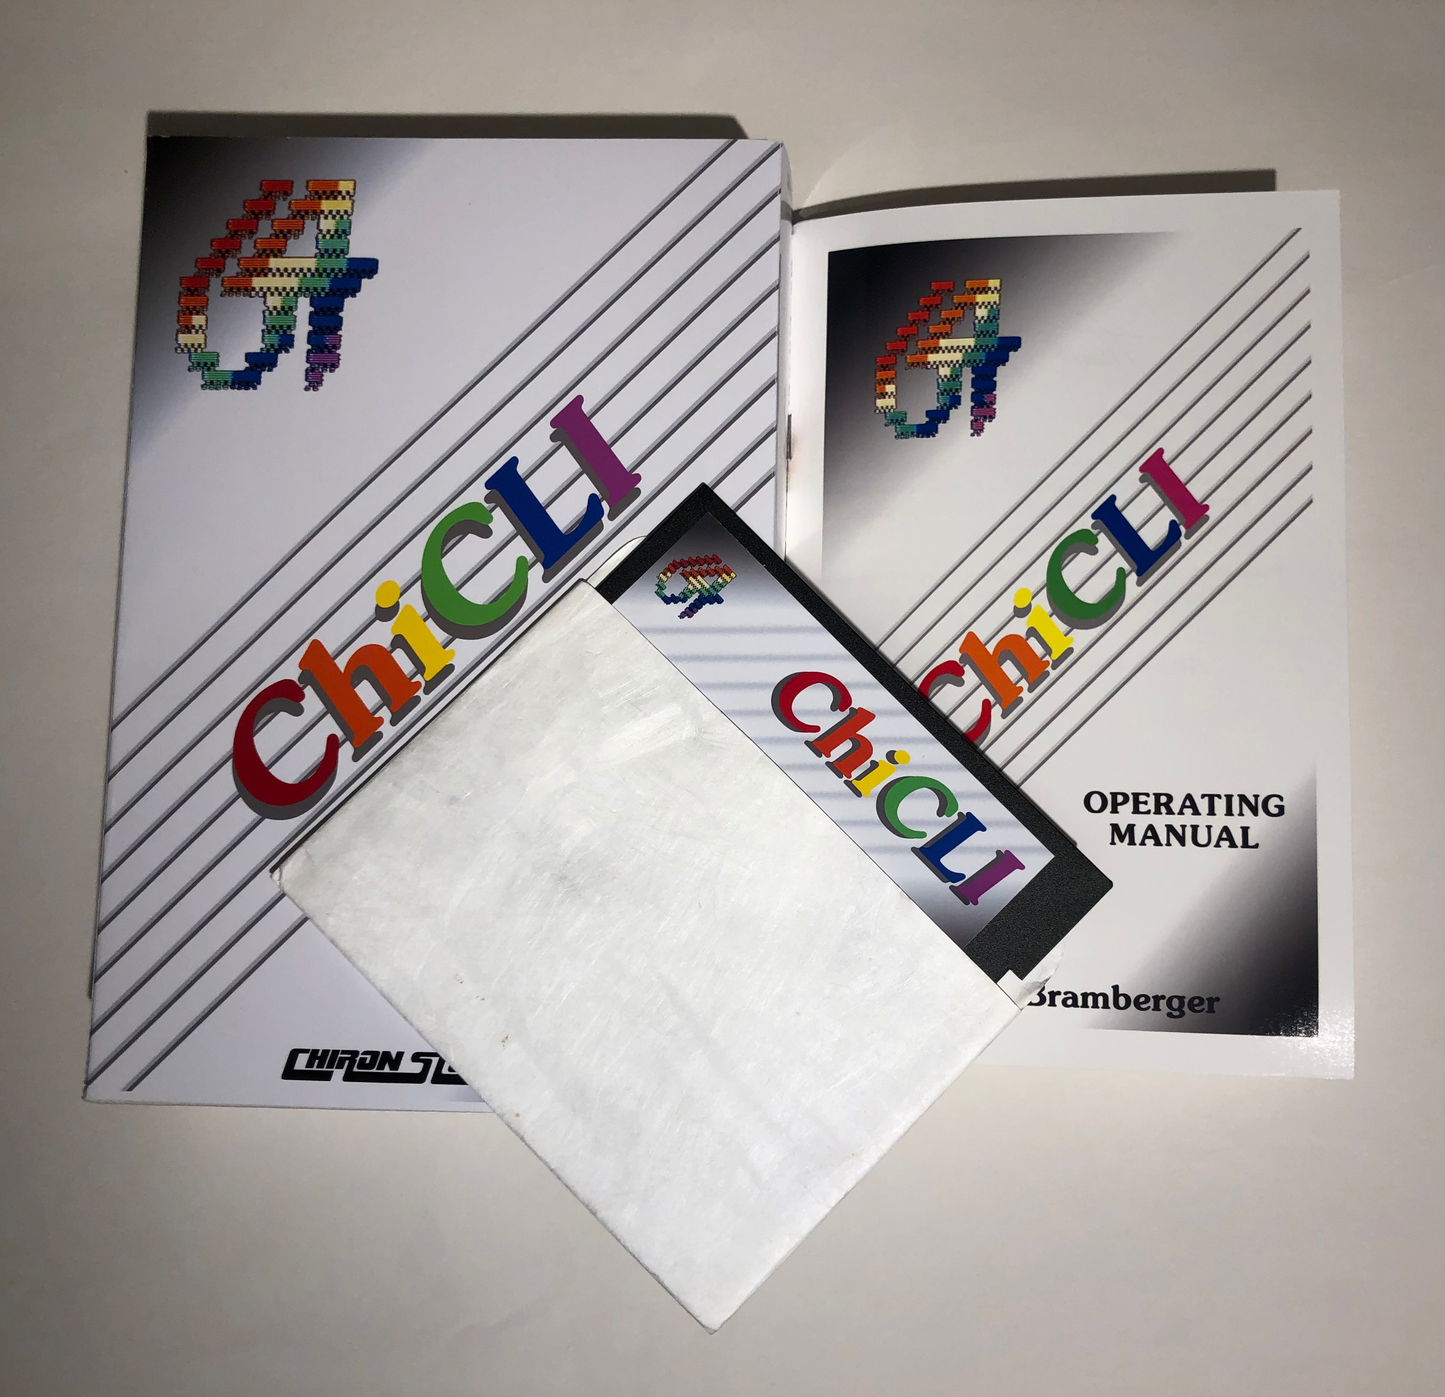 ChiCLI - Boxed Edition with Manual